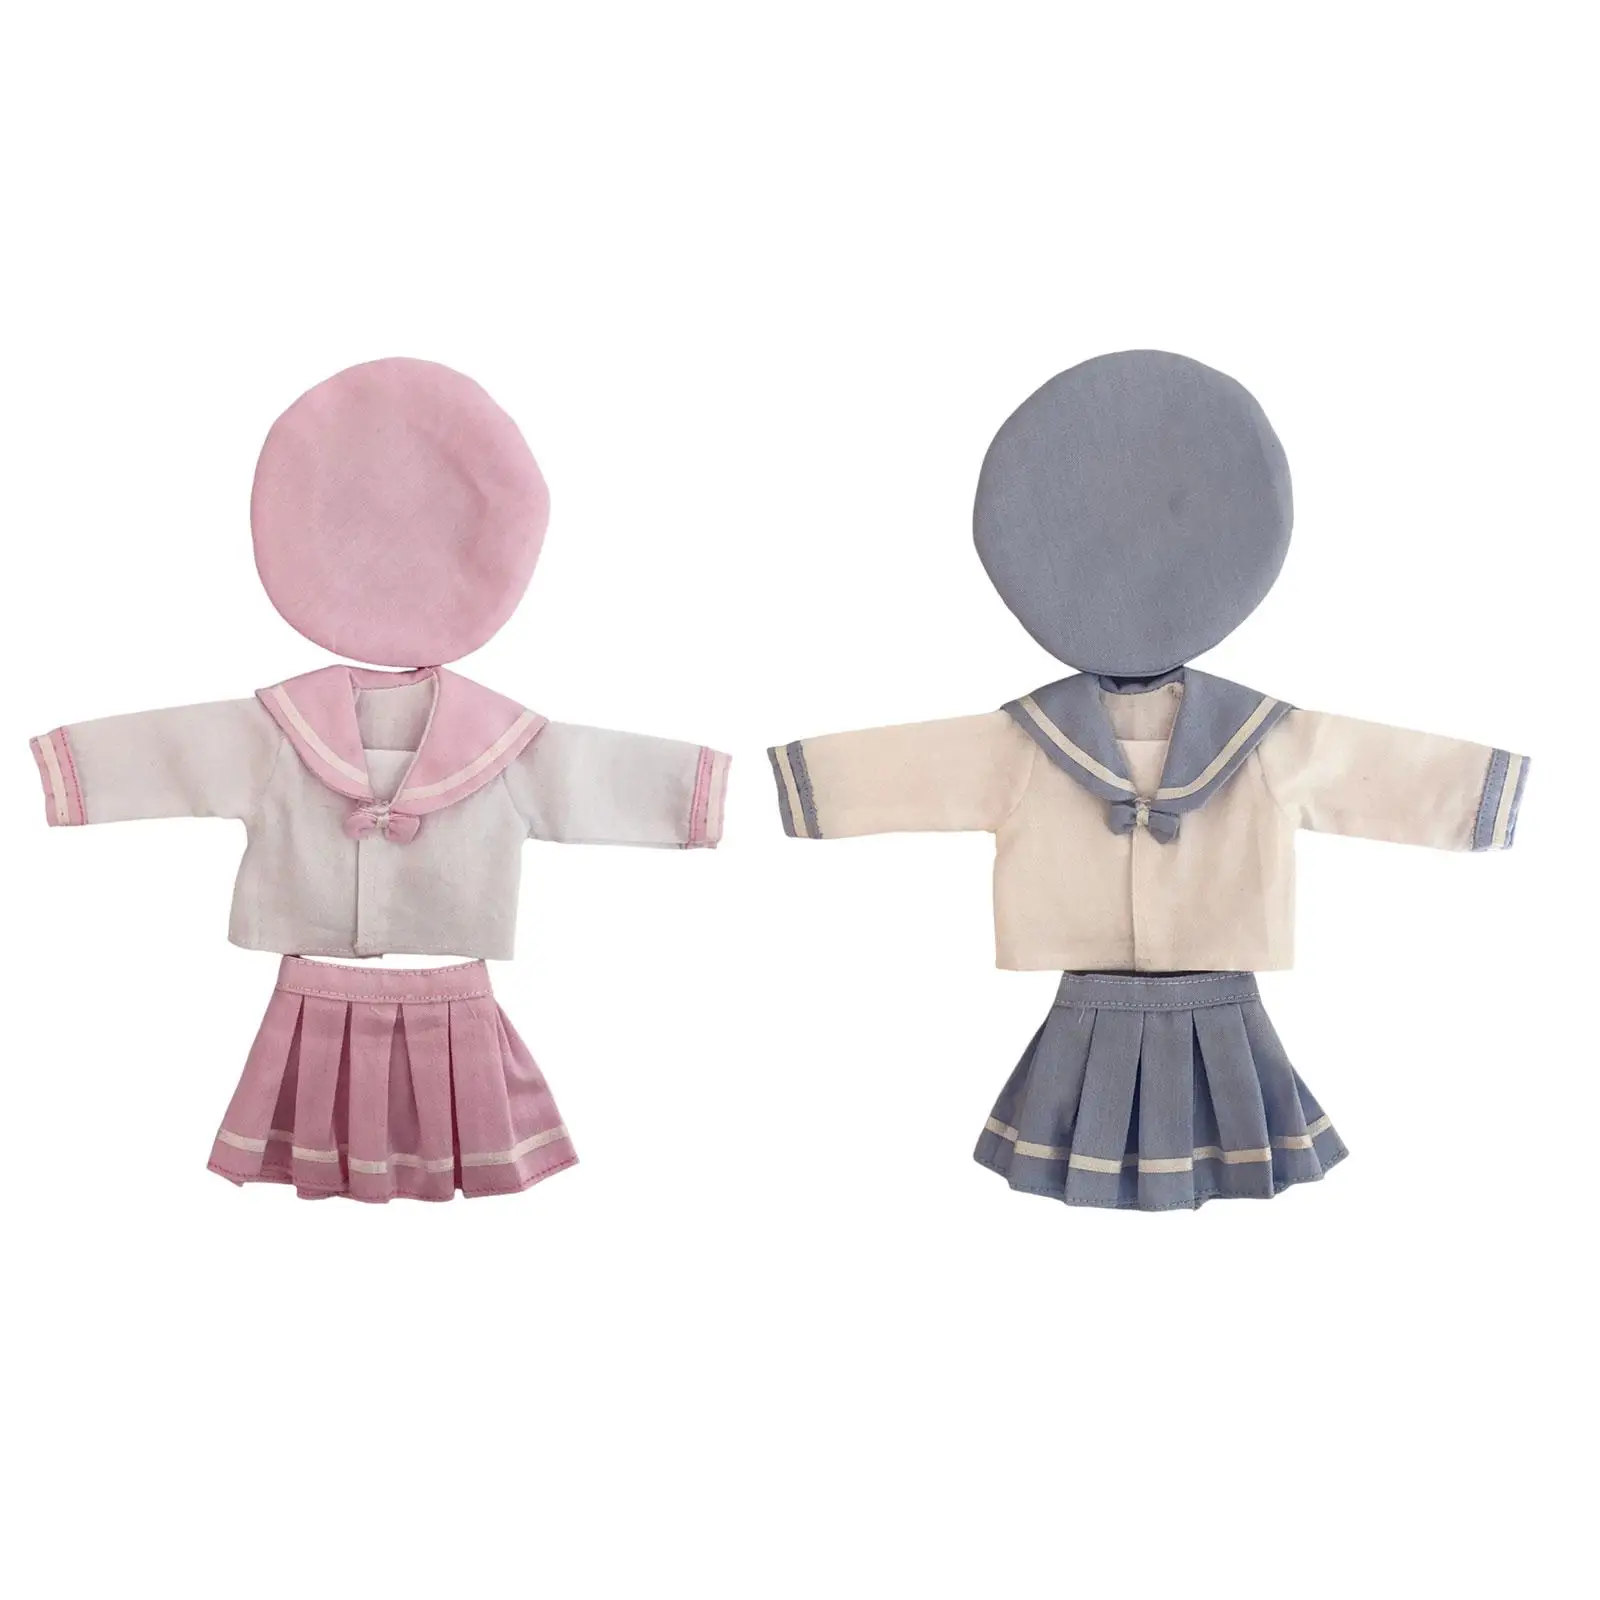 Fashion Doll Clothes Sailor Suit School Uniforms Outfits for 30cm 12`` Doll Birthday Gift Accessory Dress up Girl Toy